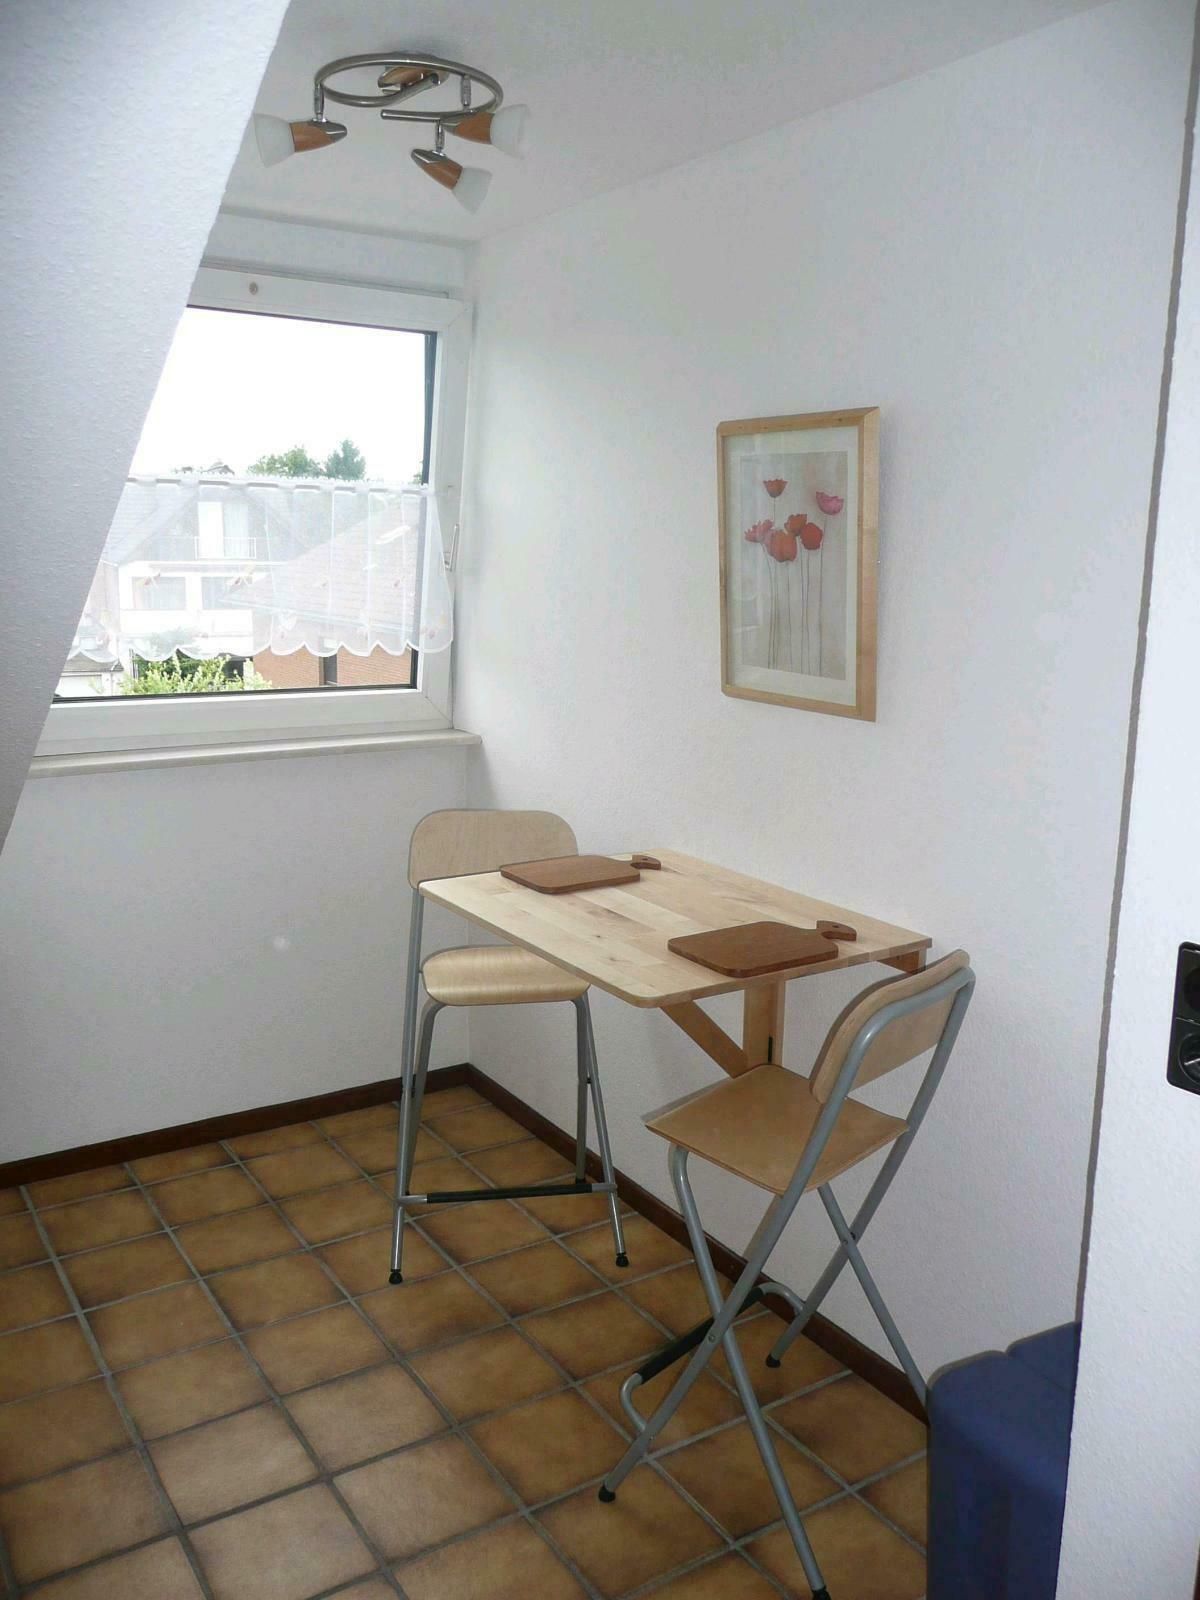 Fashionable 2-room attic apartment with balcony in Ratingen